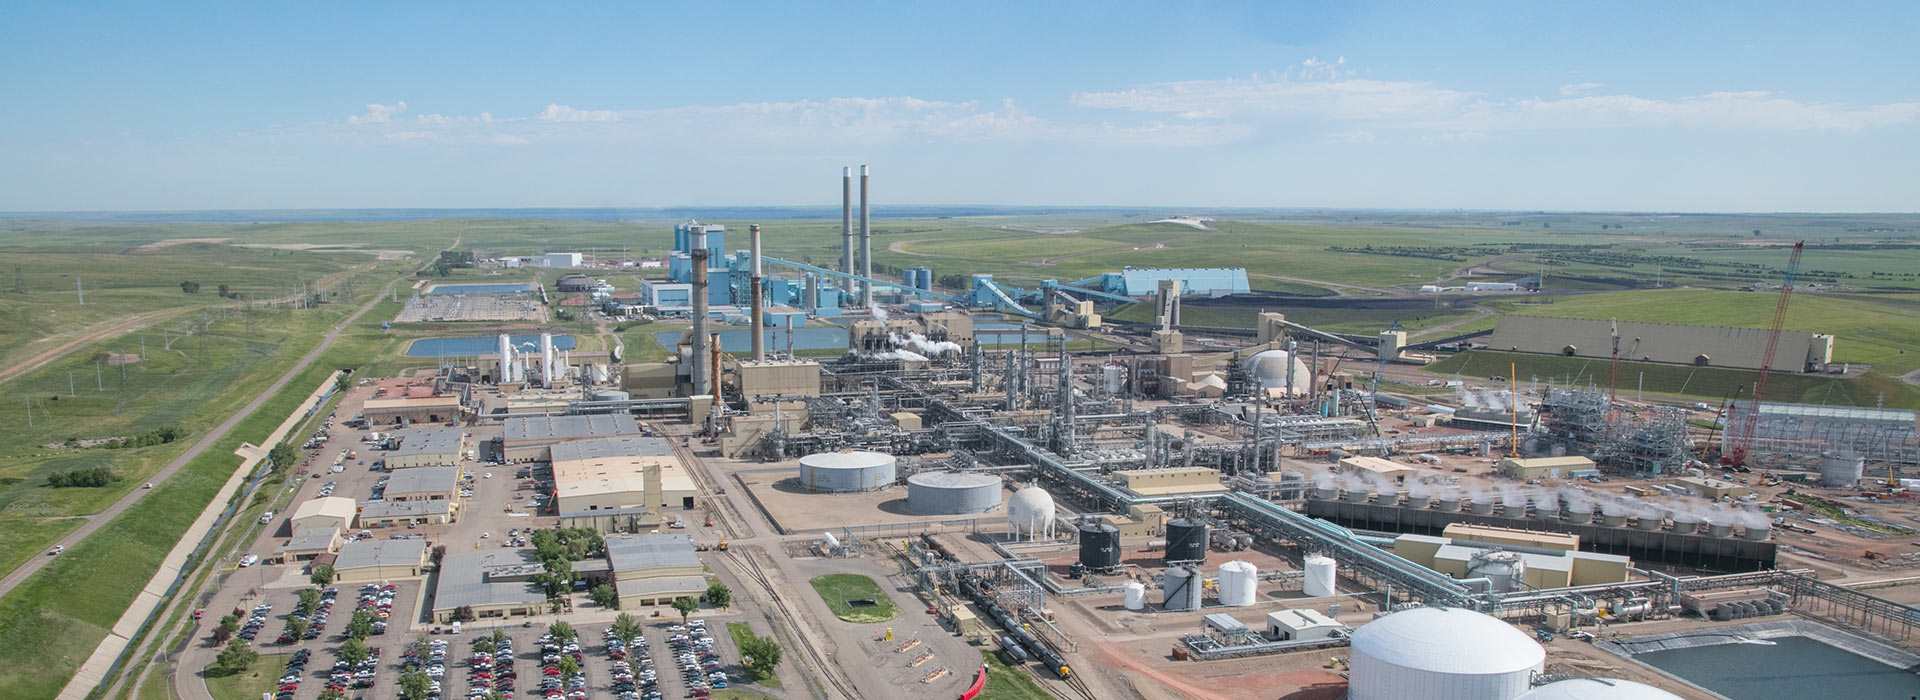 Great Plains Synfuels Plant aerial photo